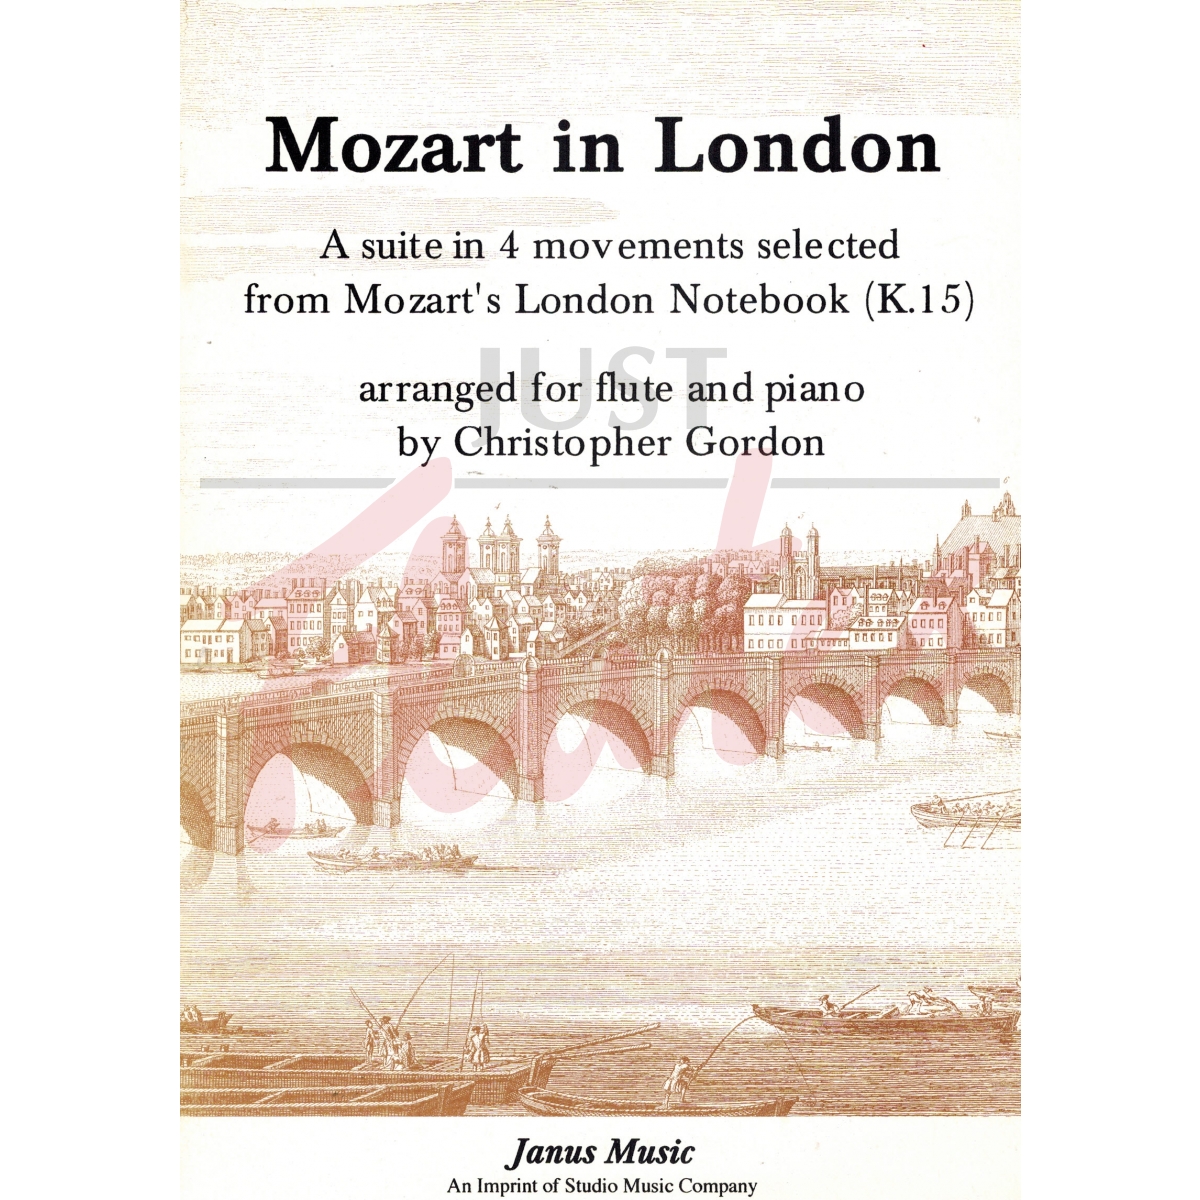 Mozart in London - A Suite in Four Movements selected from Mozart's London Notebook